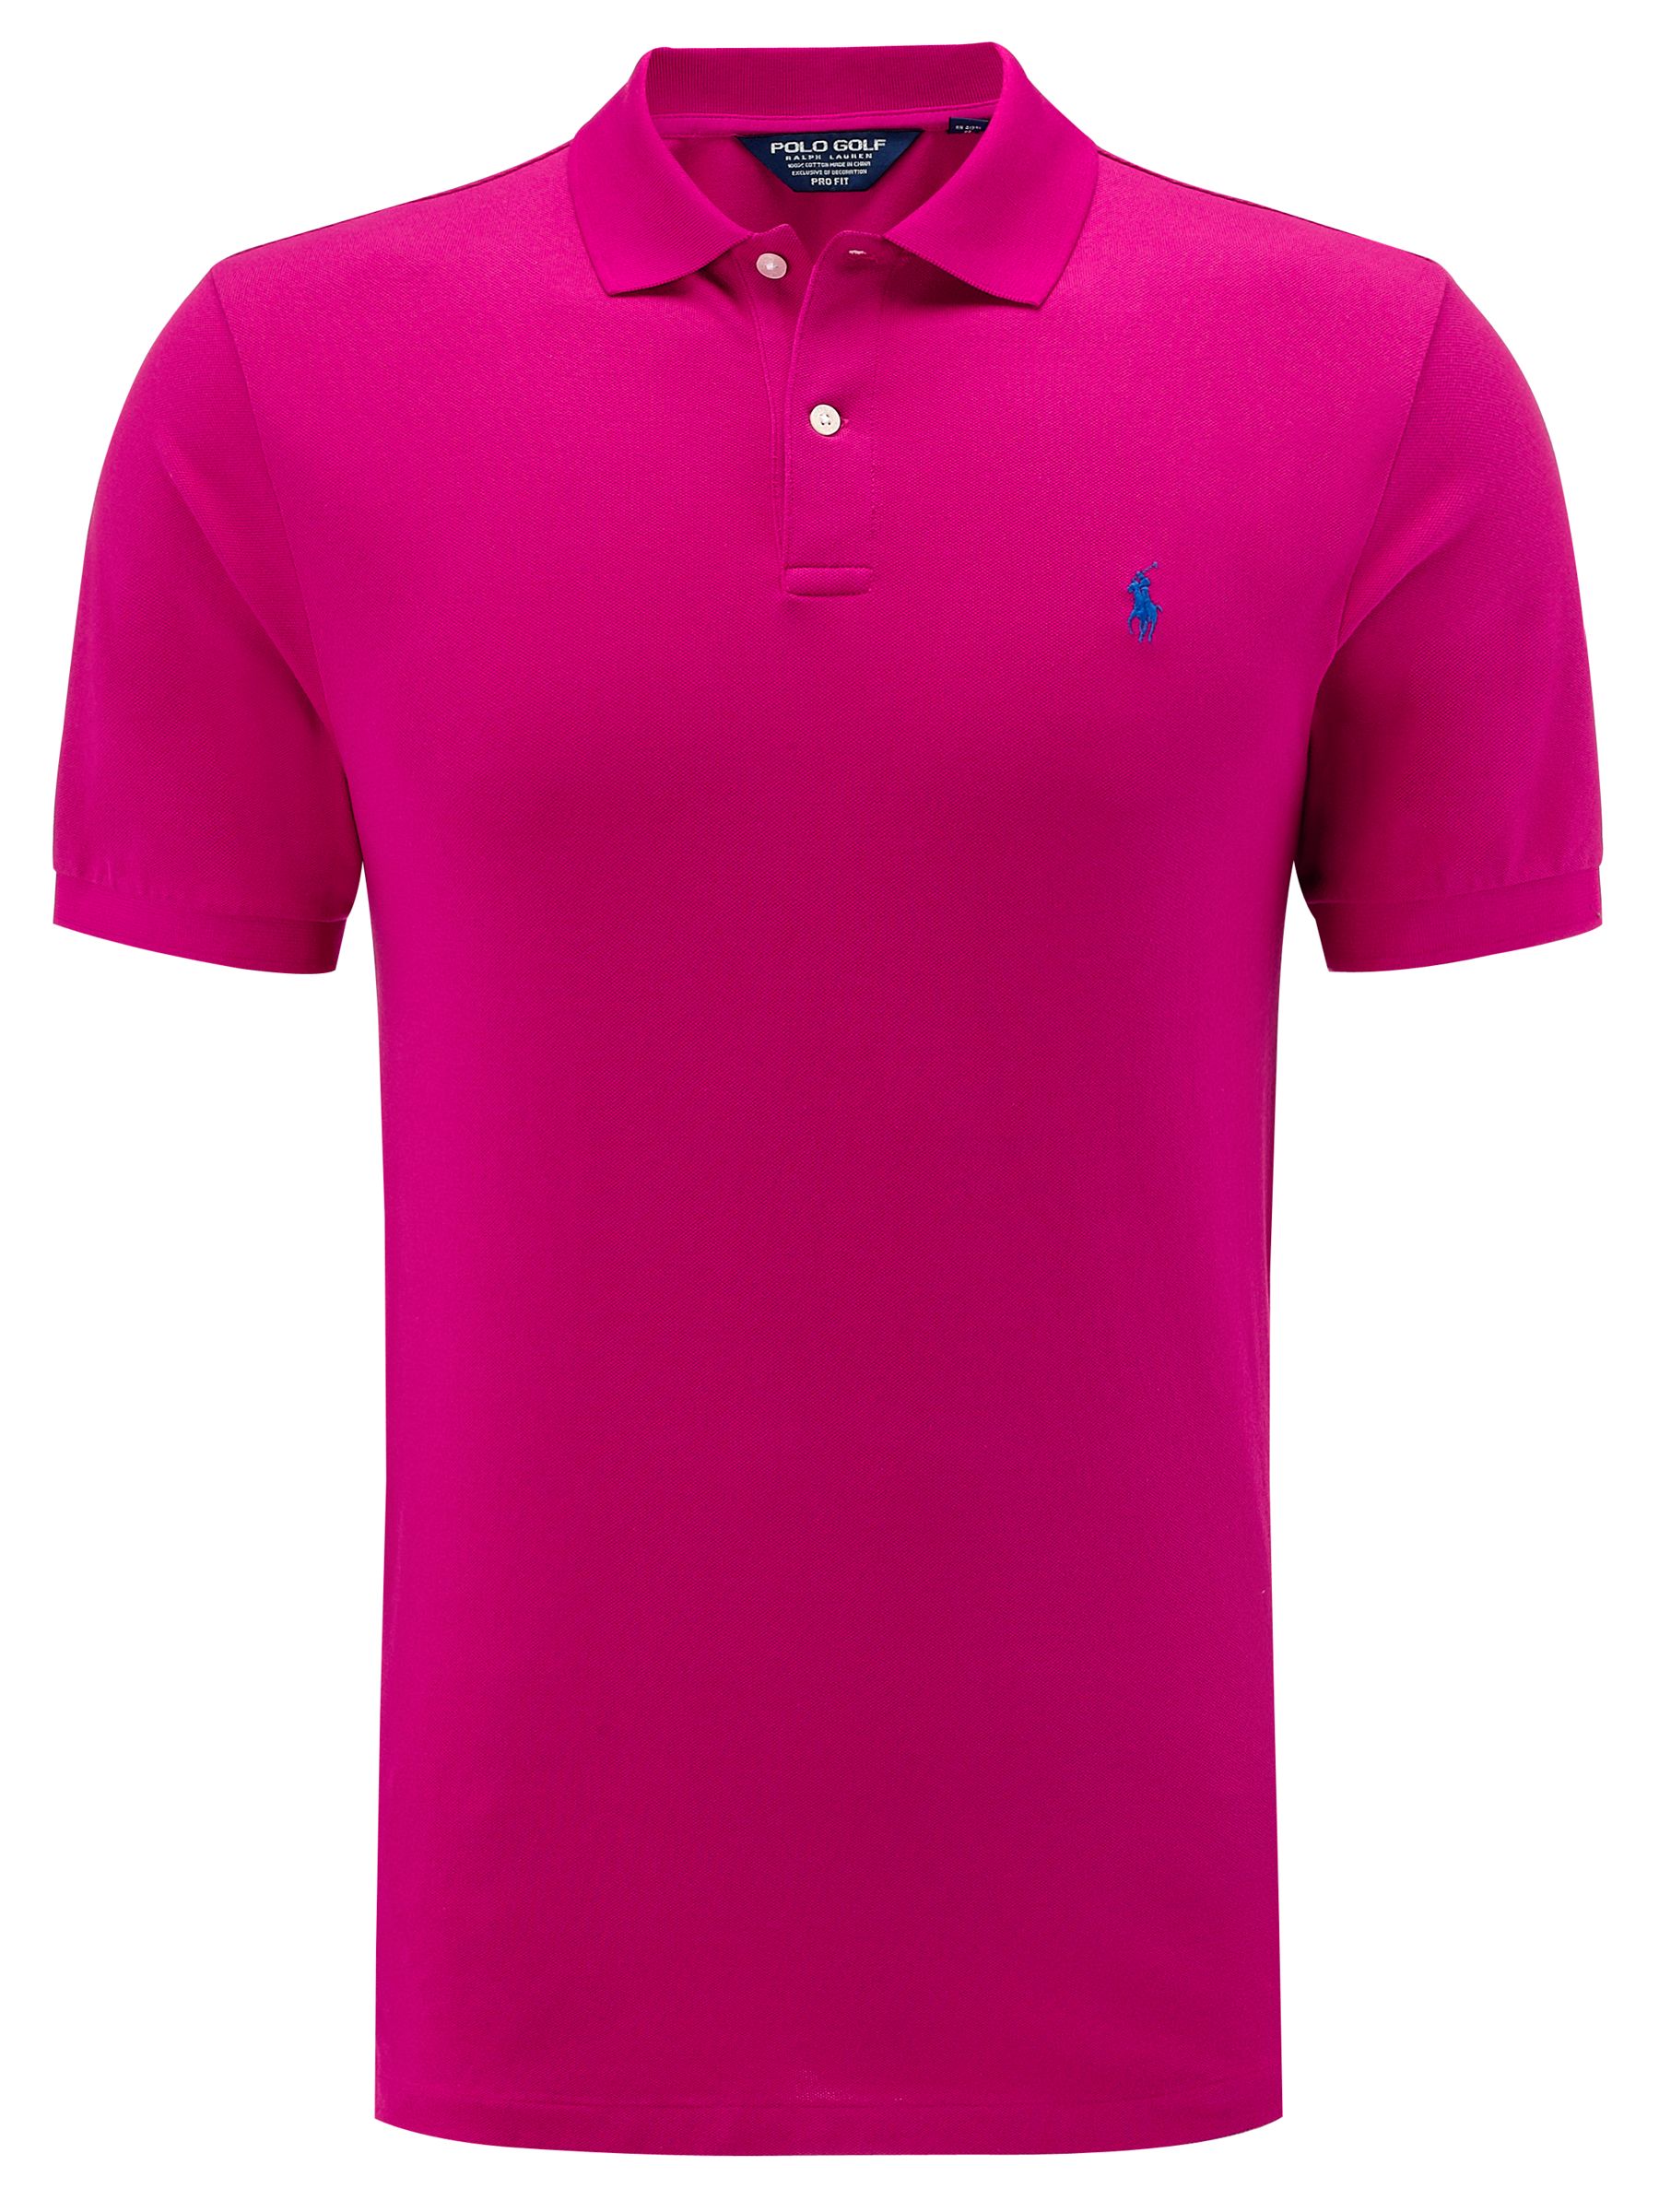 Buy Polo Golf by Ralph Lauren Pro Fit Polo Shirt, Pink online at 